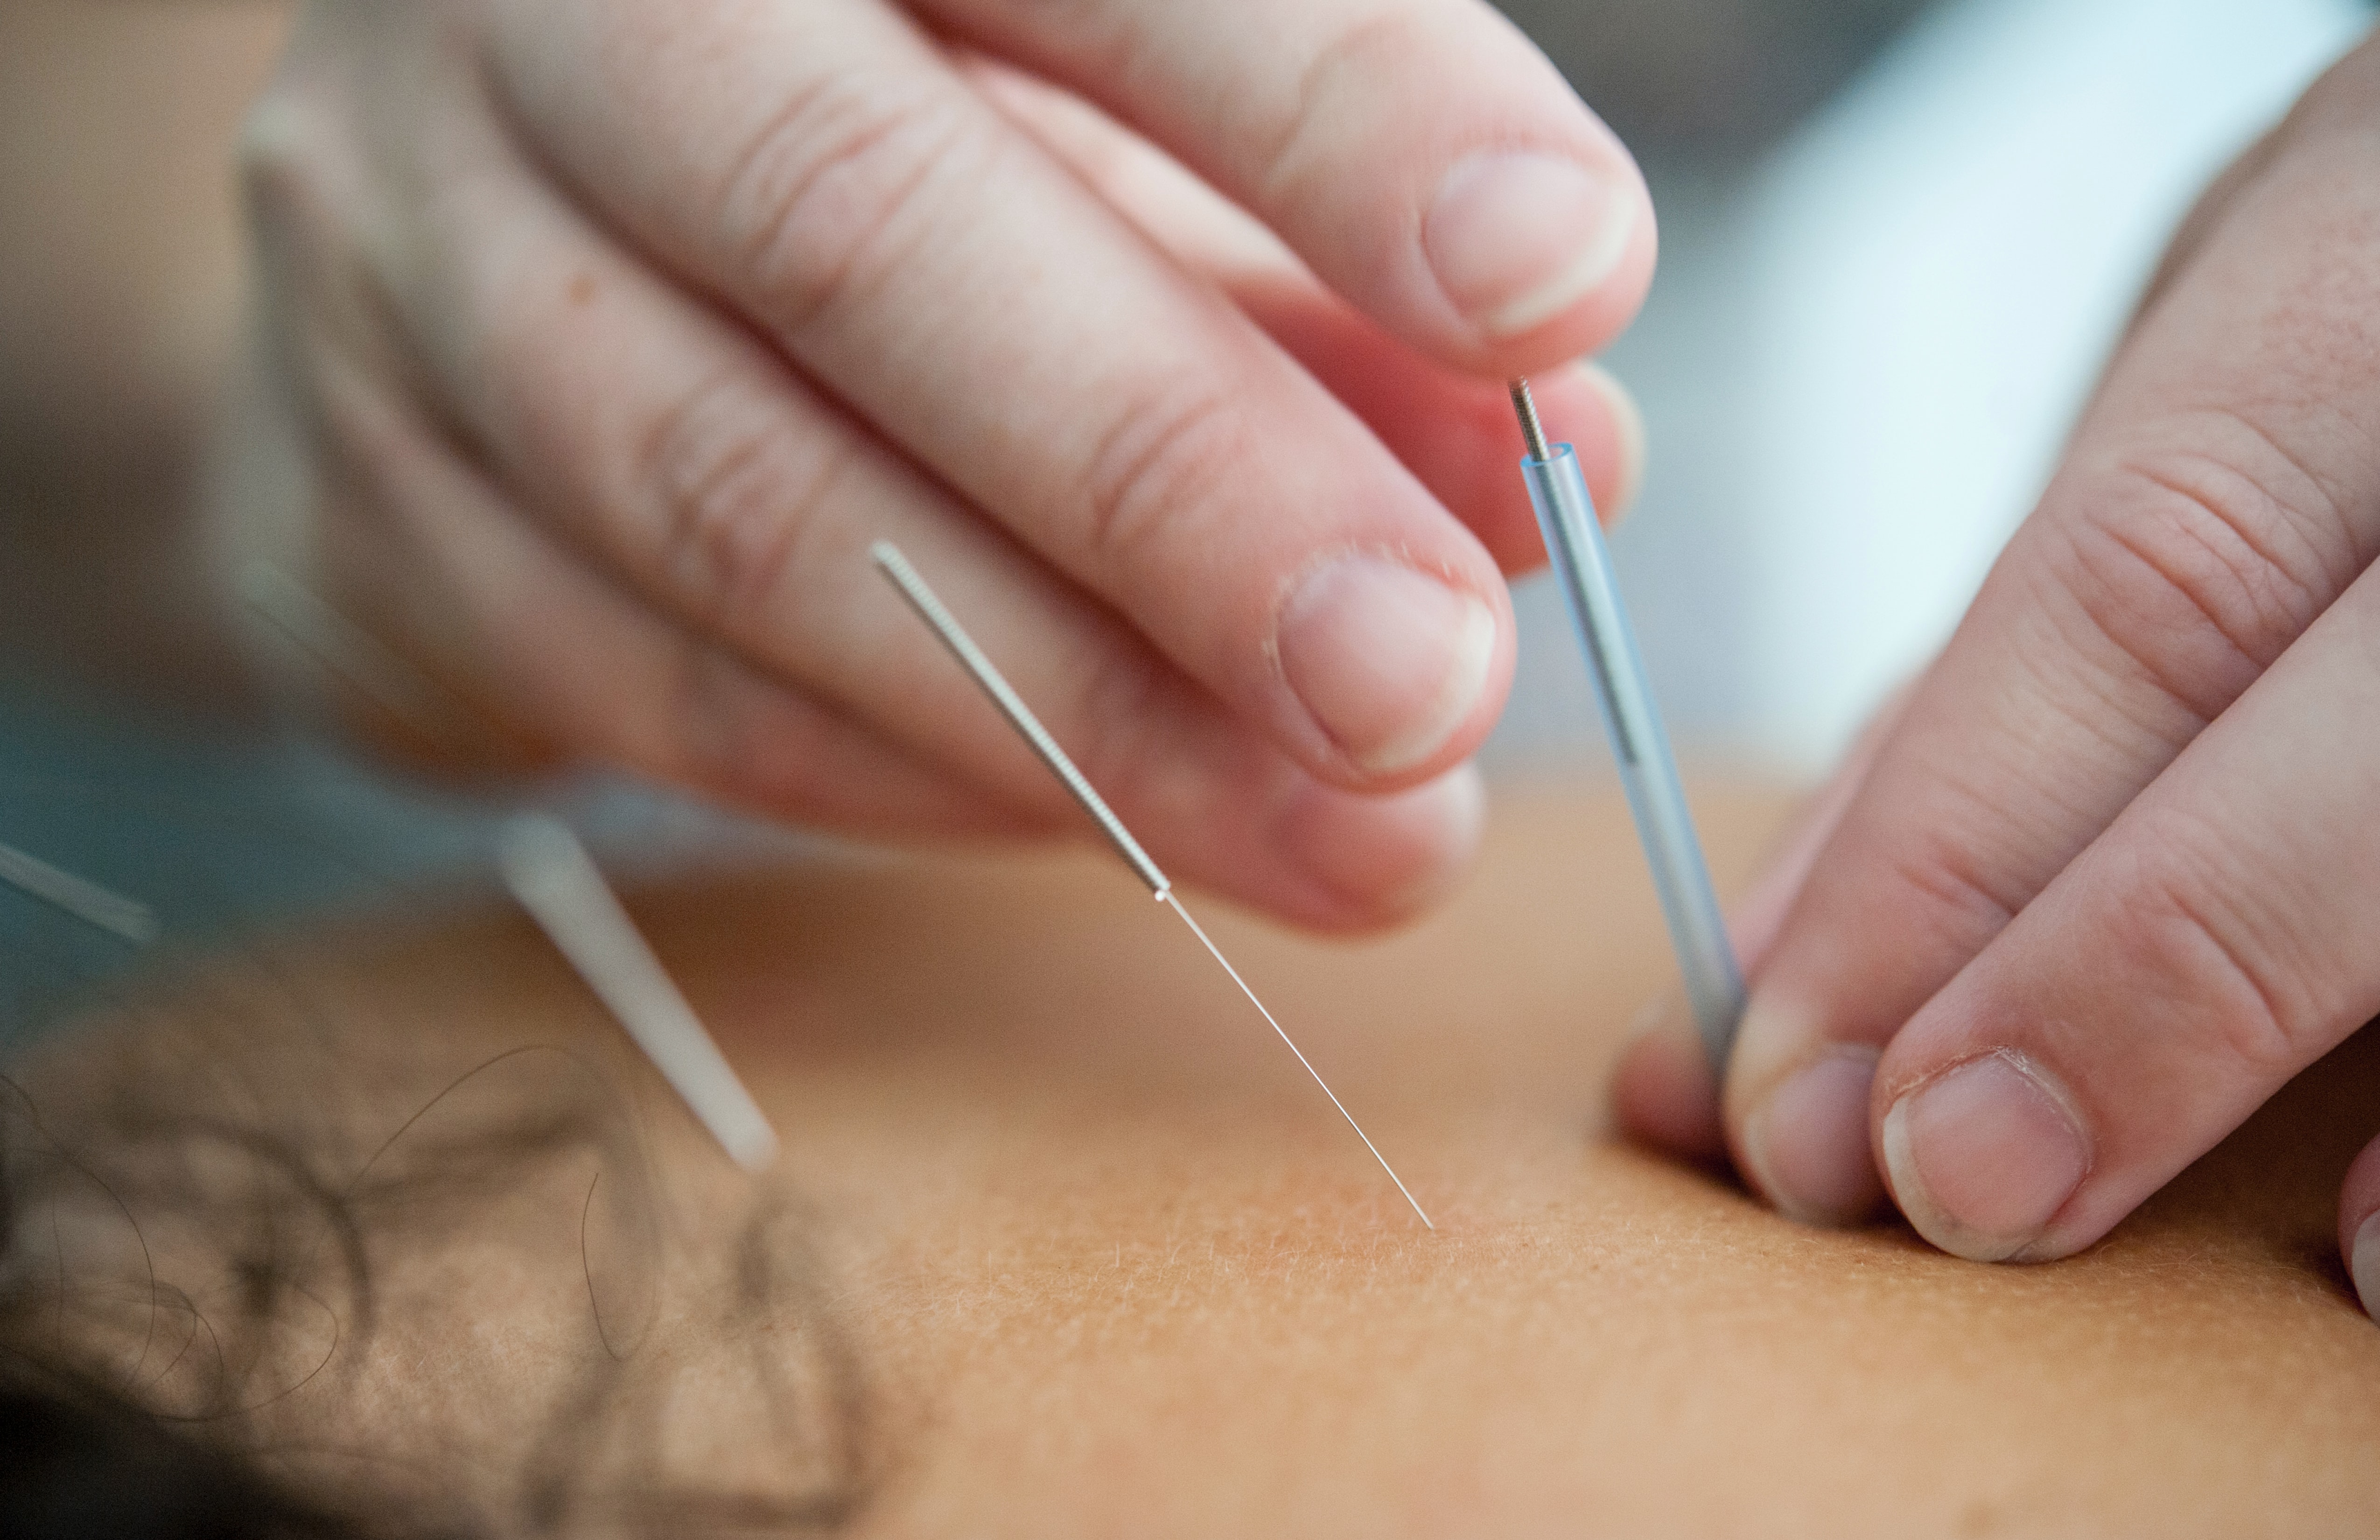 A person receiving acupuncture